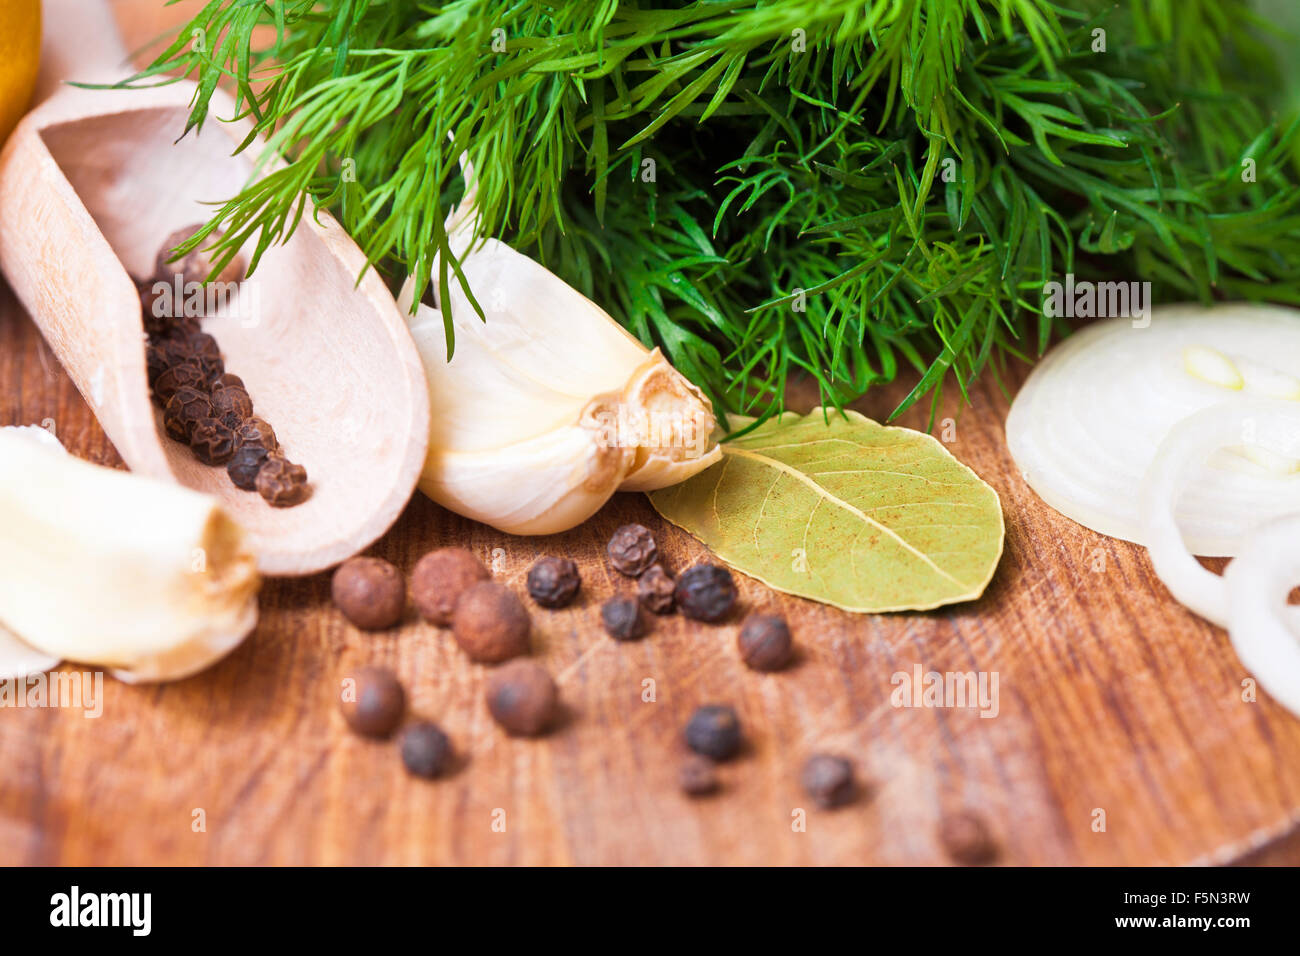 Aromatic herbs and spices on a table close-up Stock Photo